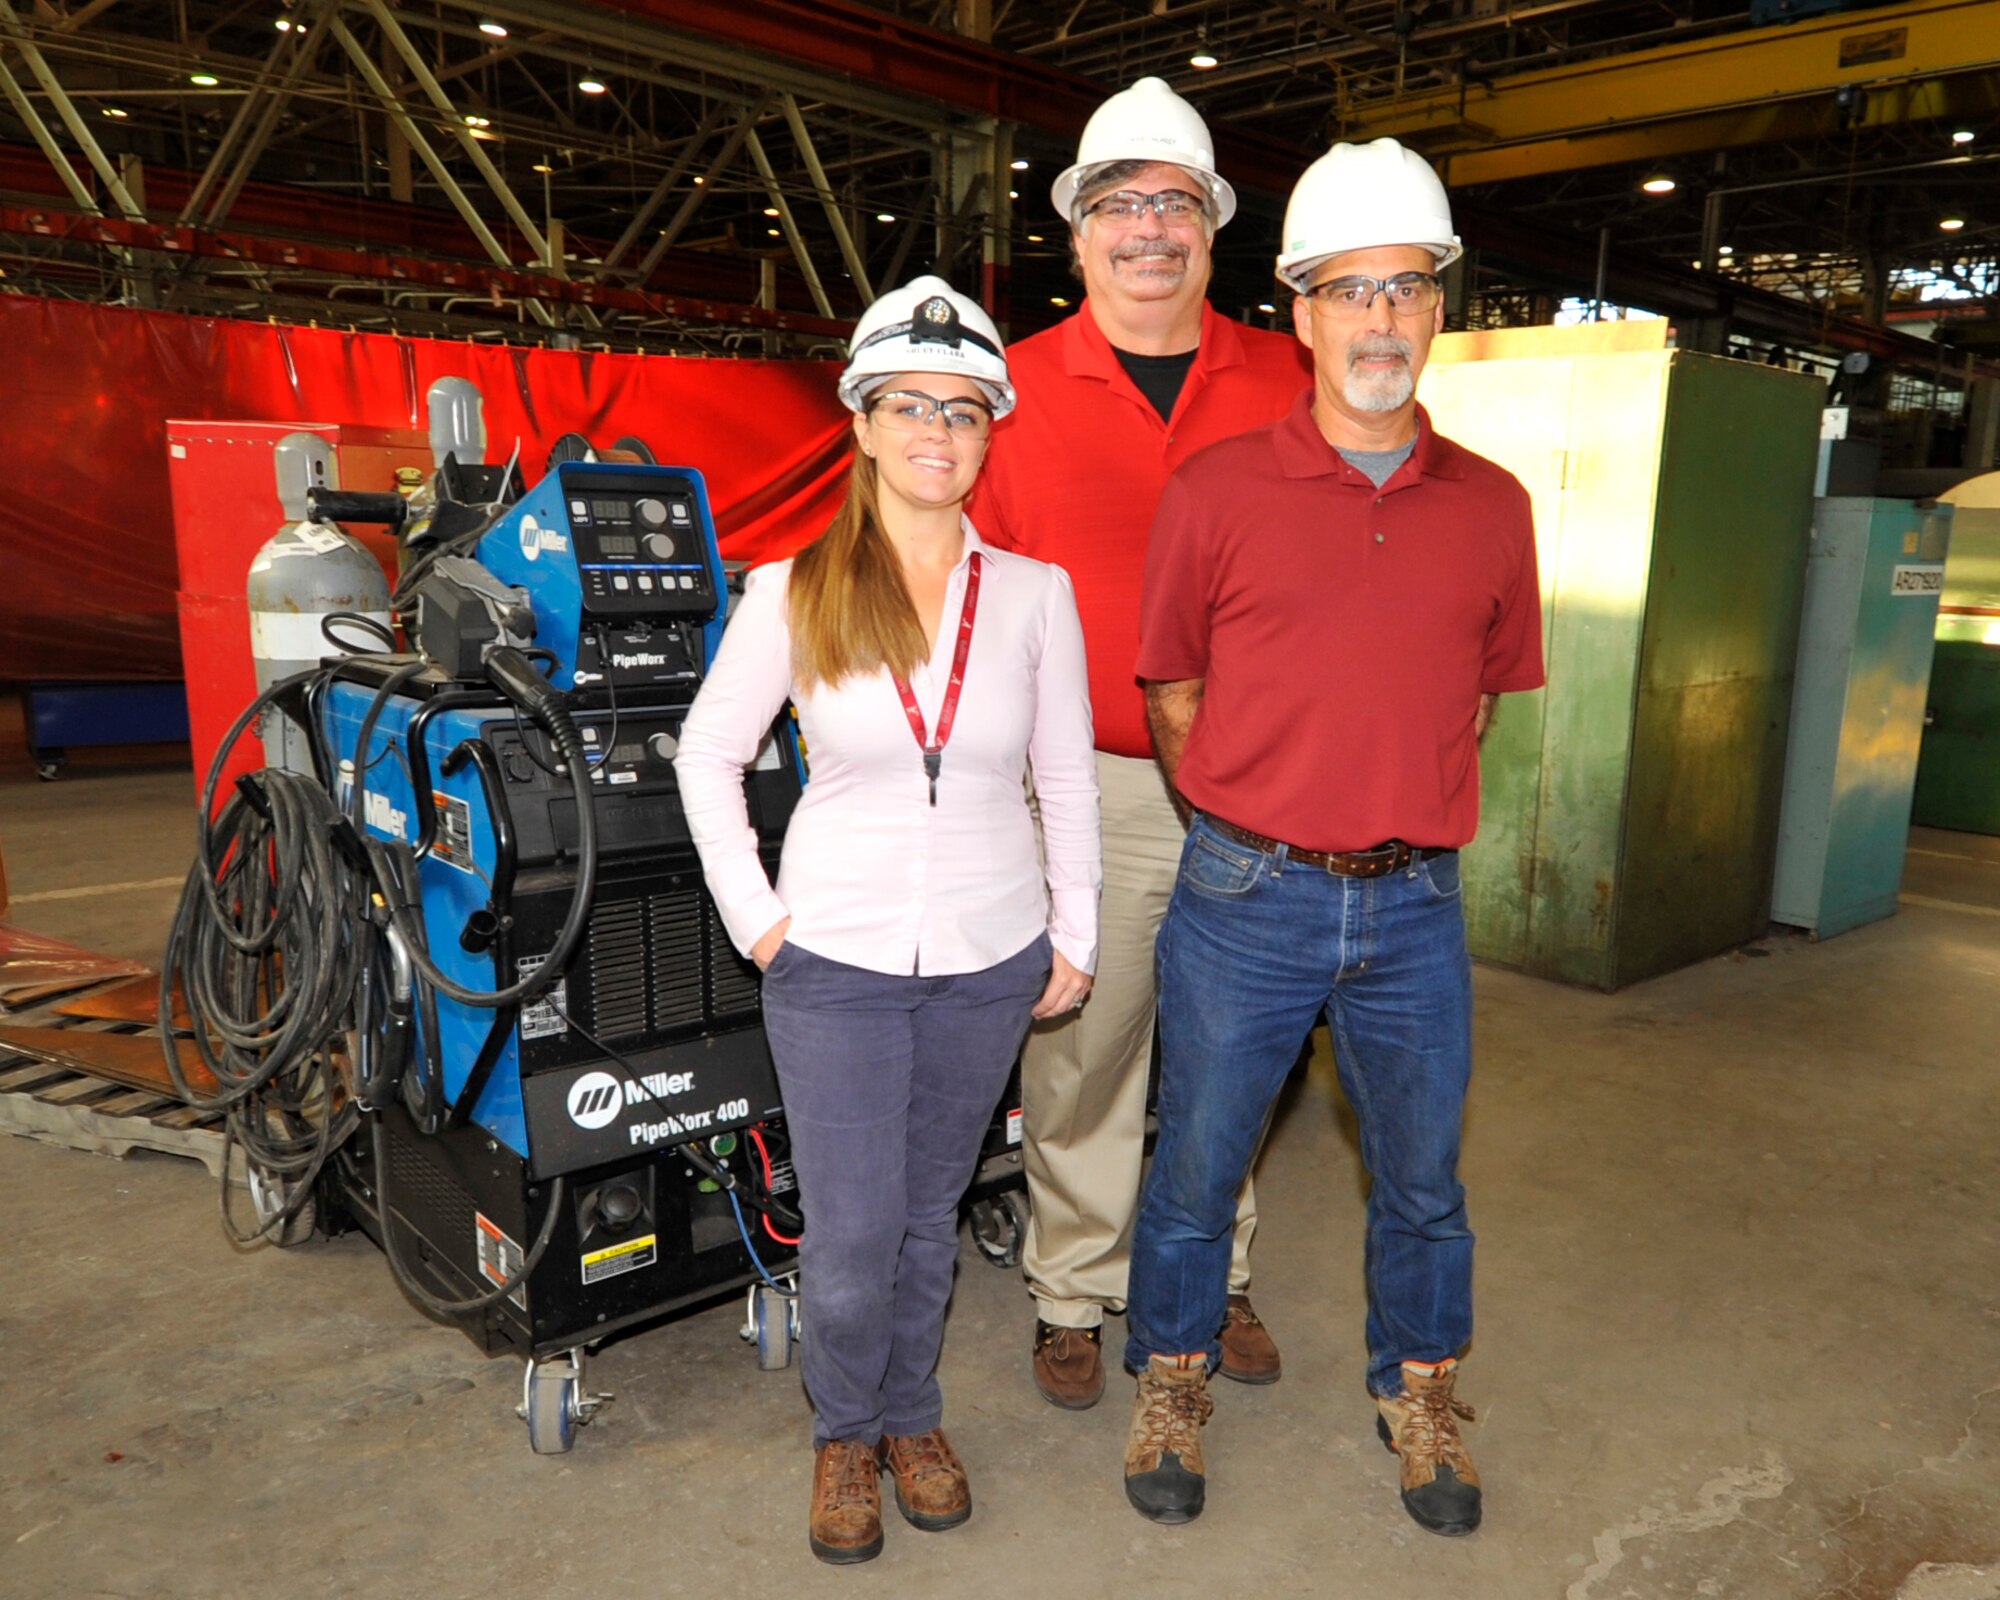 David Hurst, Asset Health Assurance Group Manager for the AEDC Model and Machine Shop, recently recognized Ashley Clark, left, and Tracy McDonald, for their efforts in reducing the cost of the preventative maintenance program for welding machines. Their work will lead to a savings over the life of the contract of approximately $200,000.